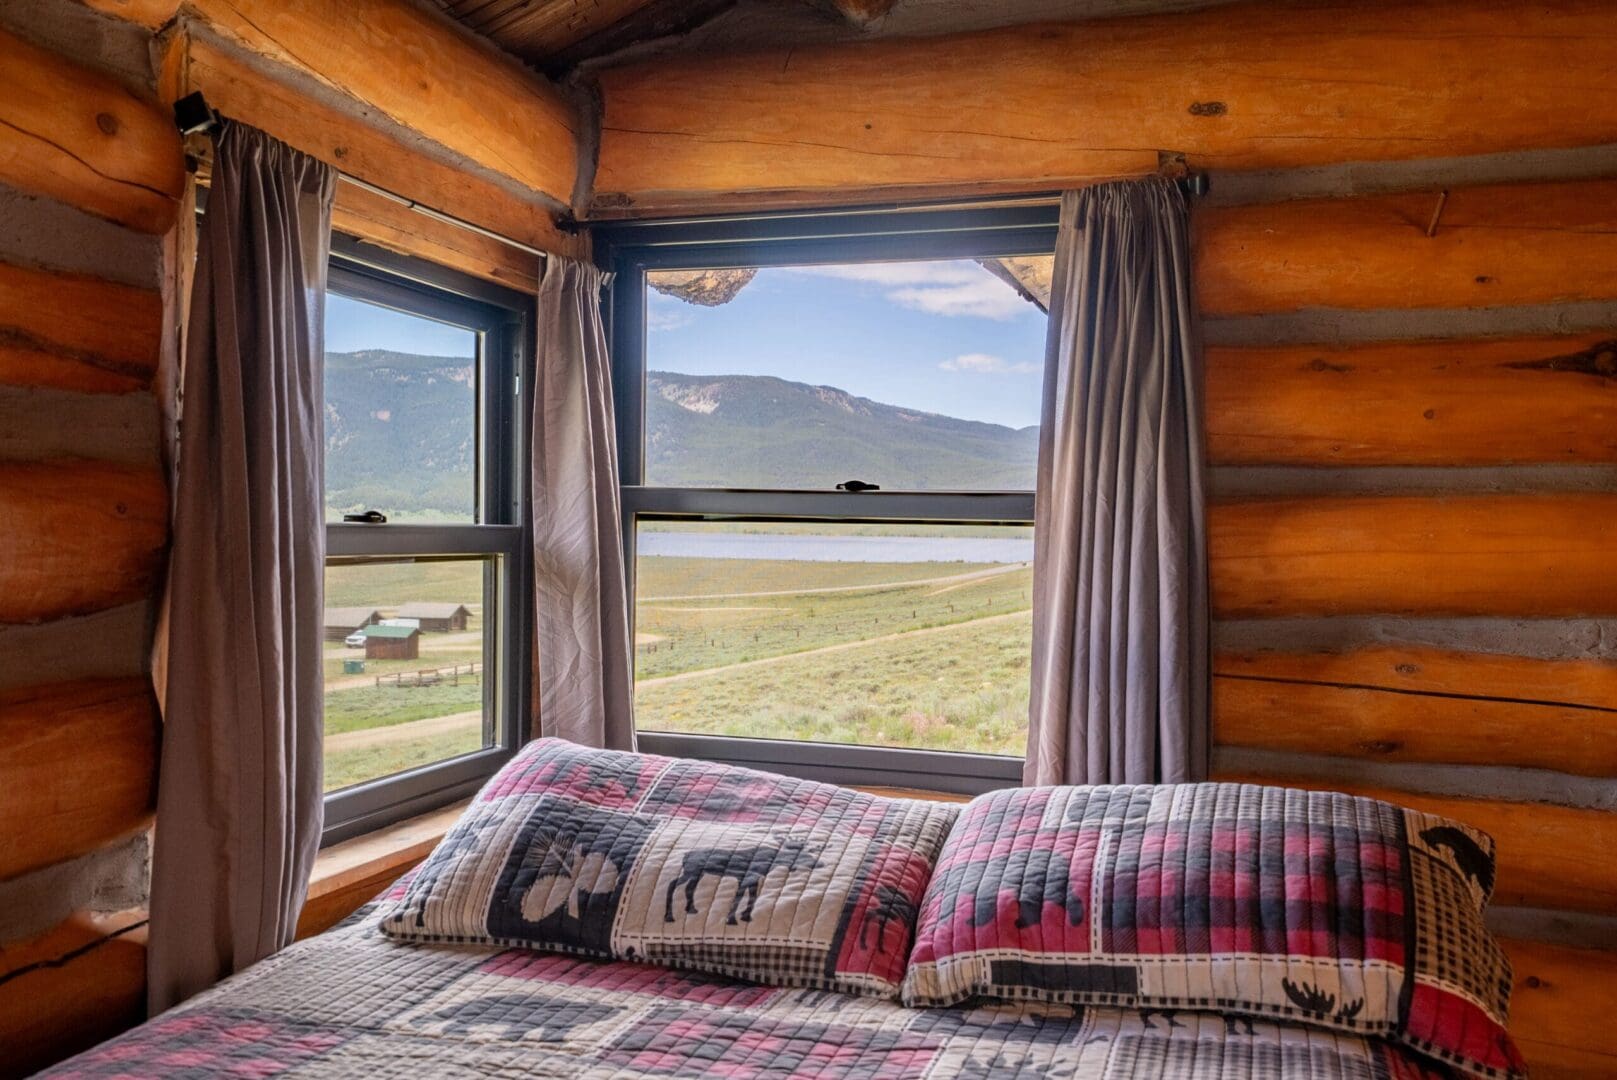 A Cabin Space With Grey Color Curtains Image Section